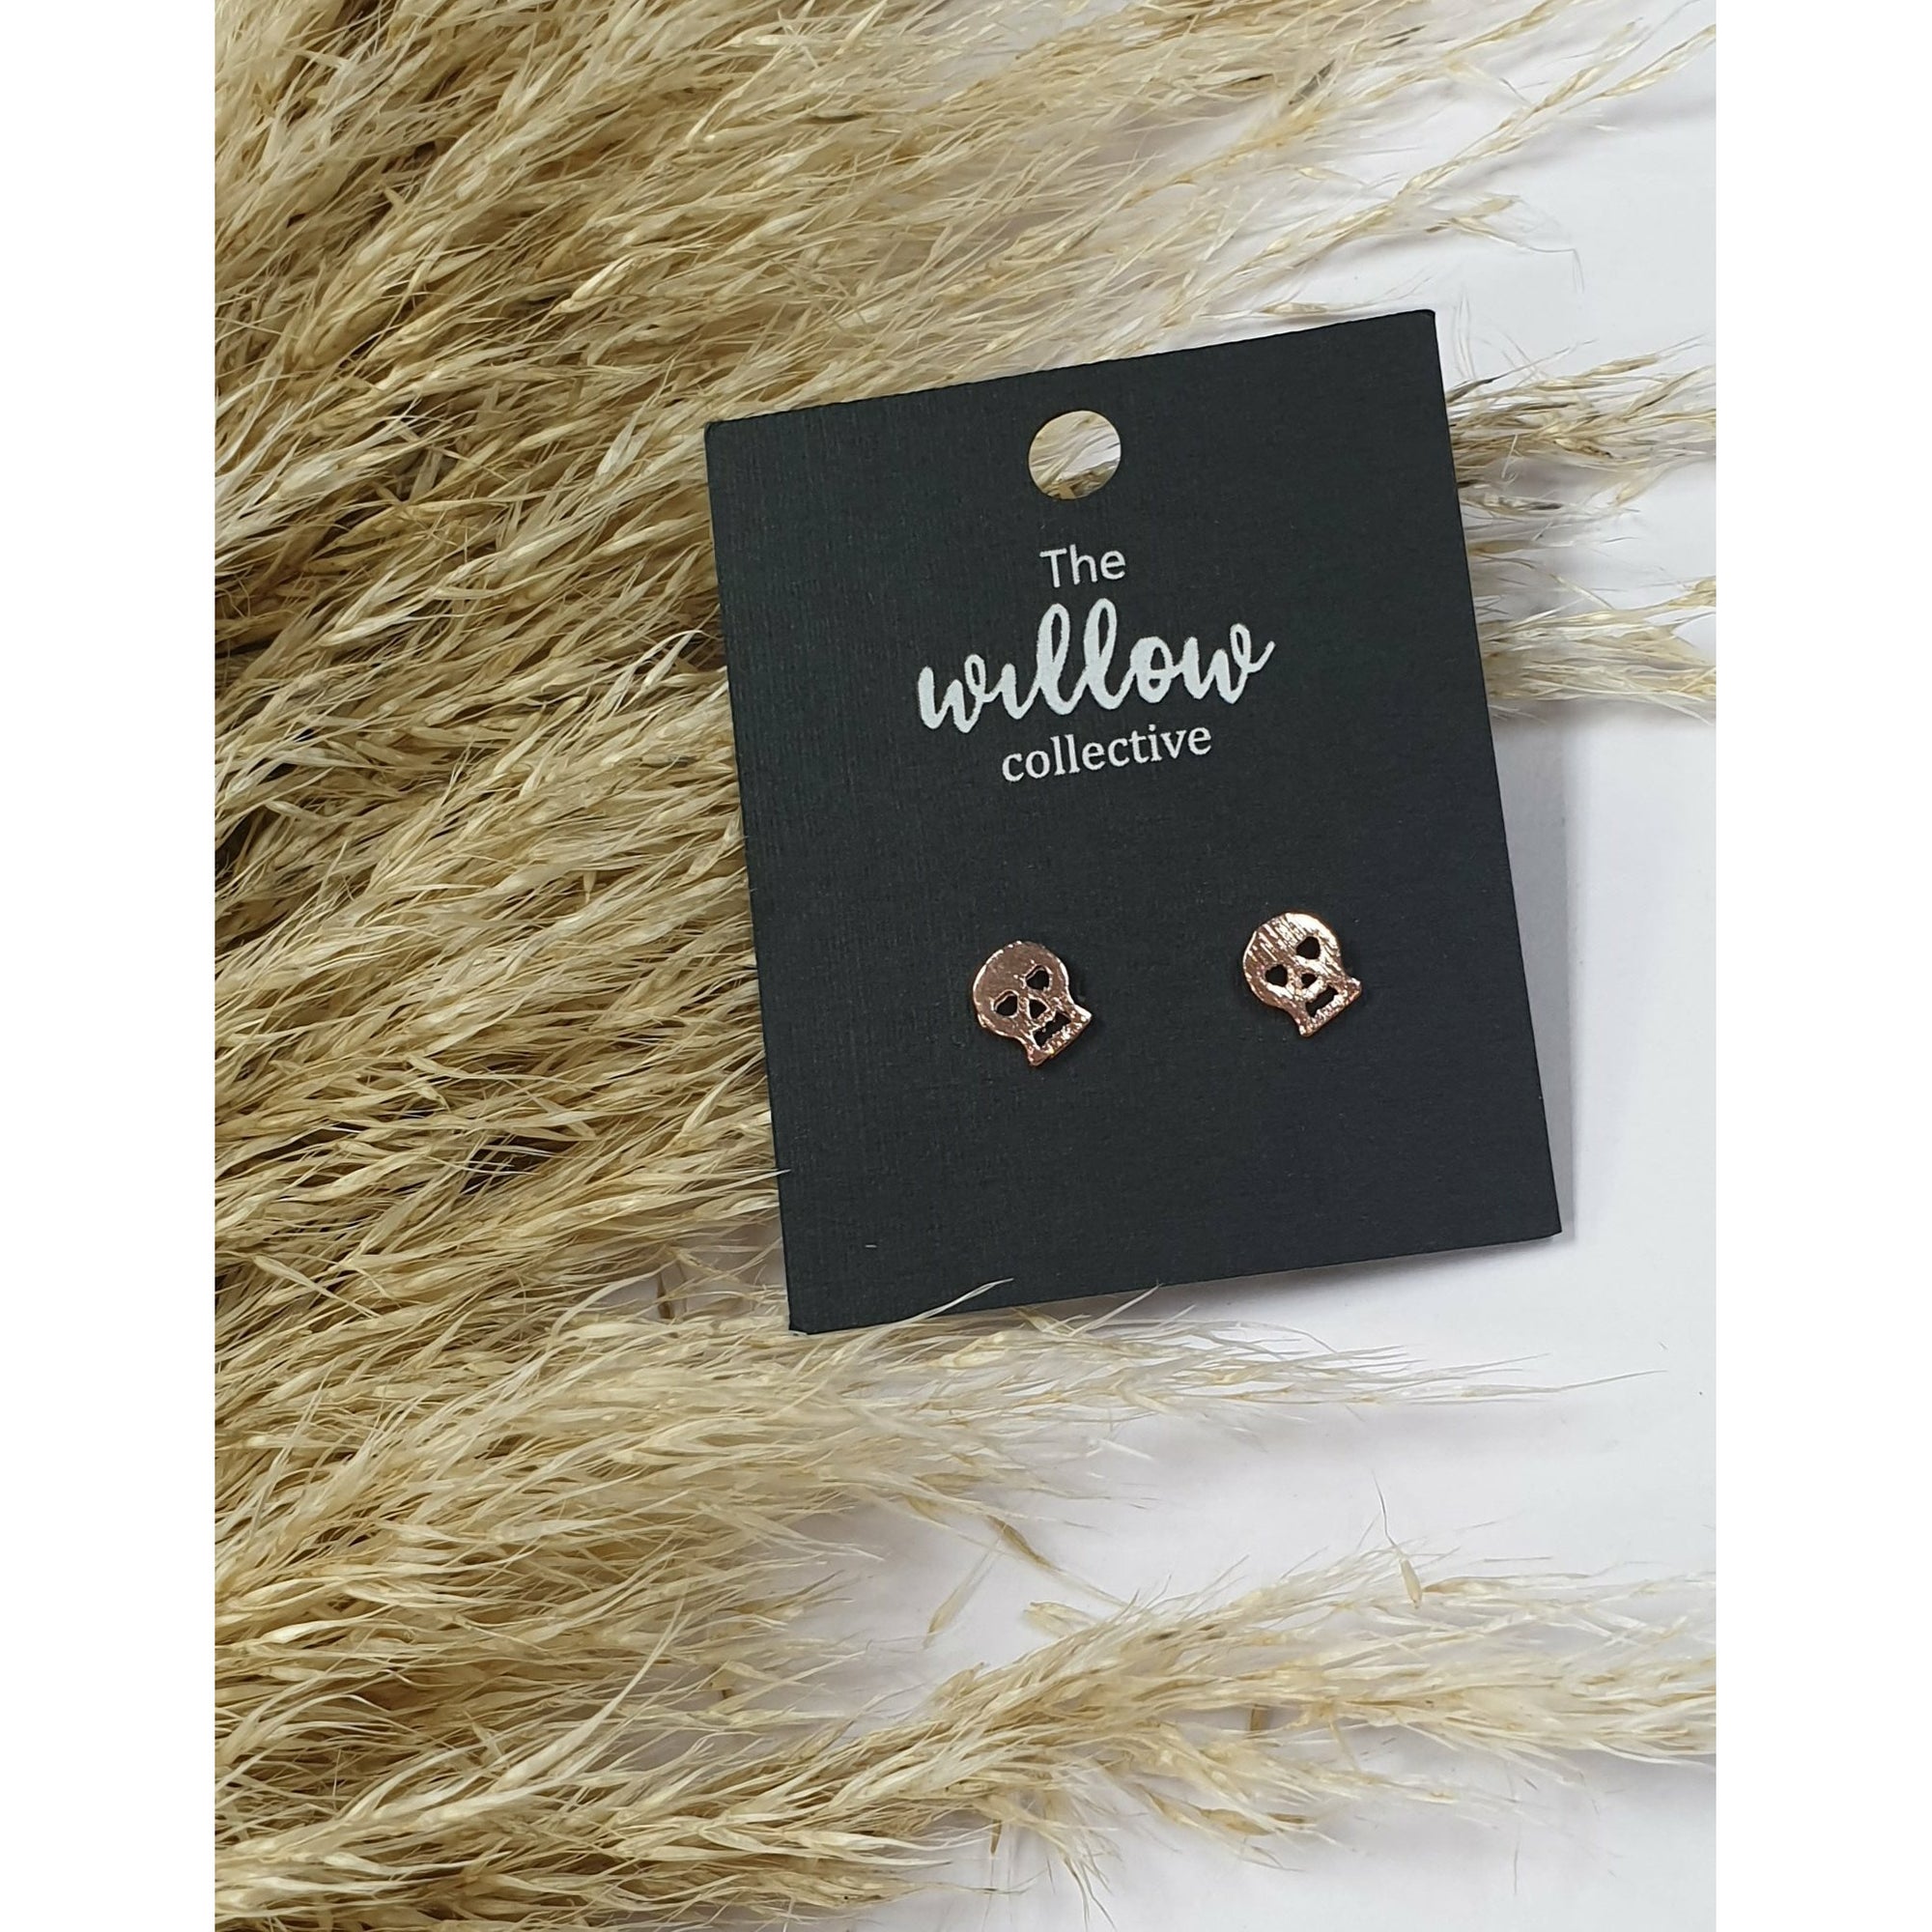 The Willow Collective - Heart Eye Skull Stud Earrings The Willow Collective